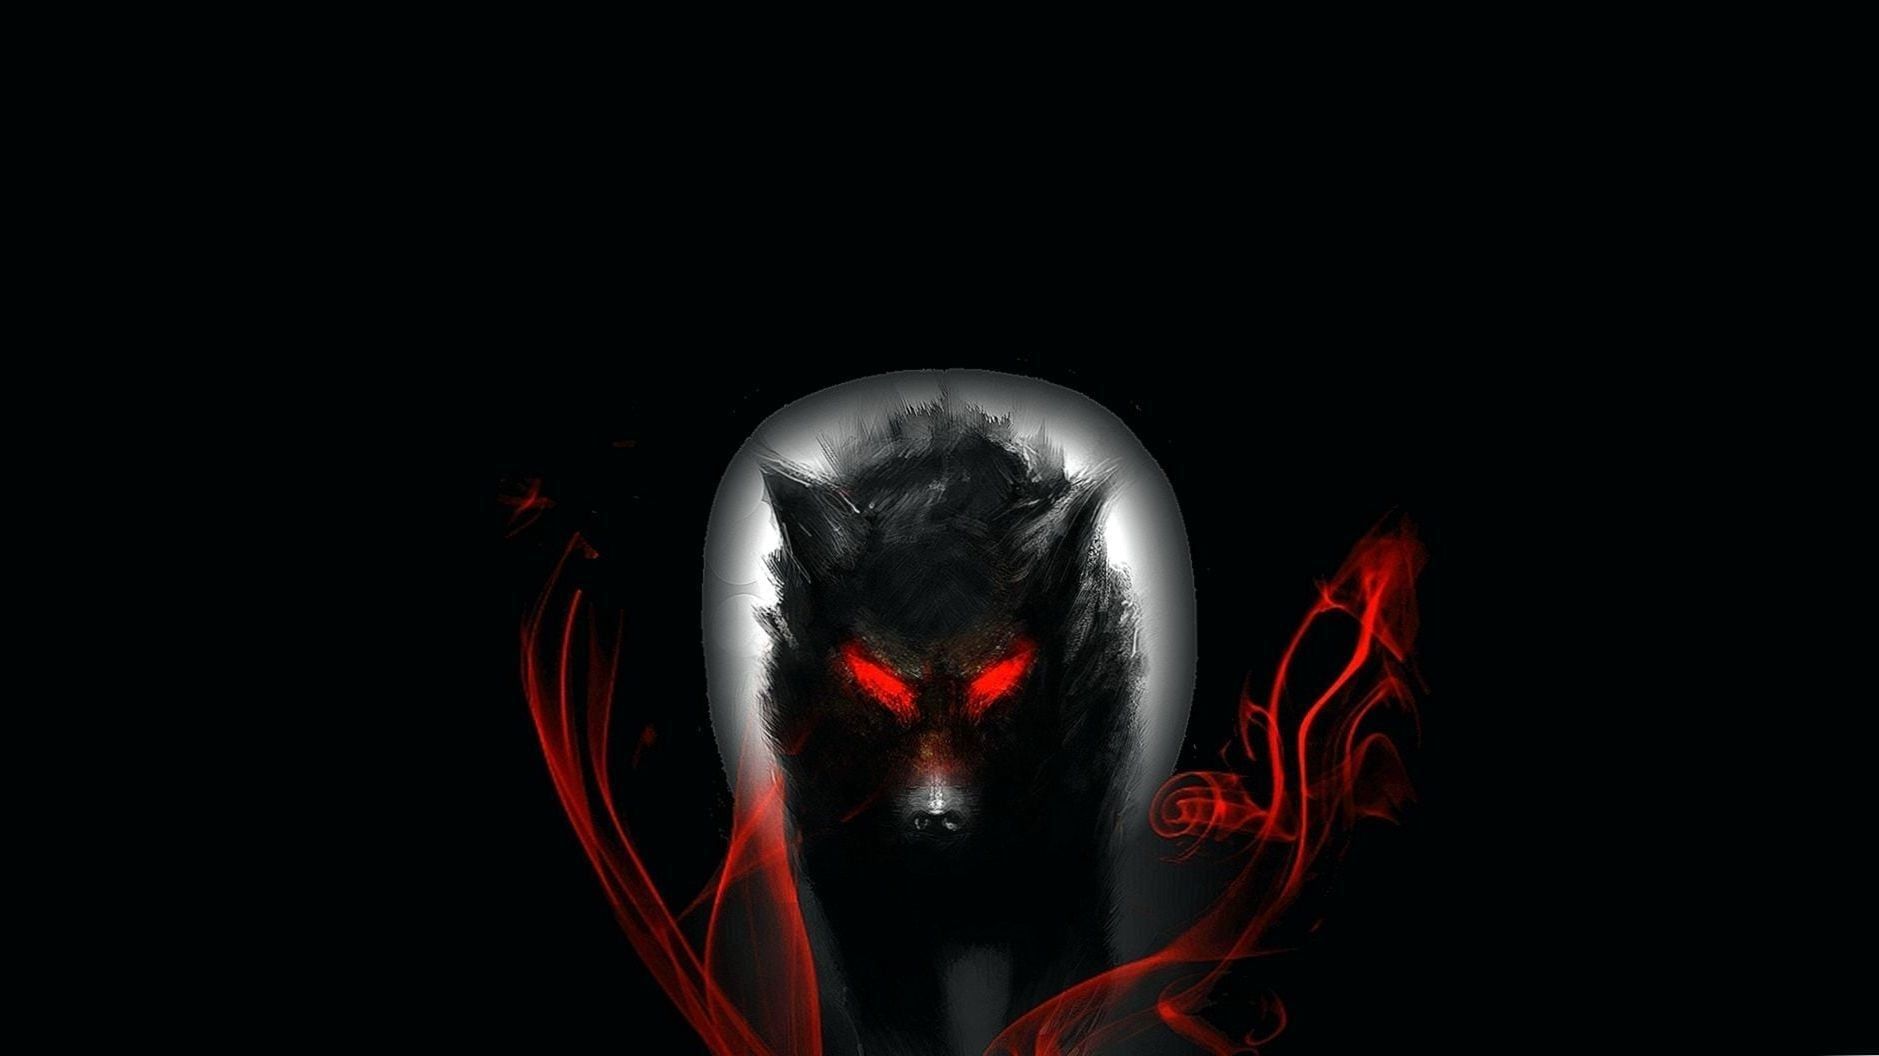 Black Wolf With Red Eyes HD Wallpaper #Black #Wolf #With #Red #Eyes #HD # Wallpaper. Wolf with red eyes, Black wolf, Wolf with blue eyes